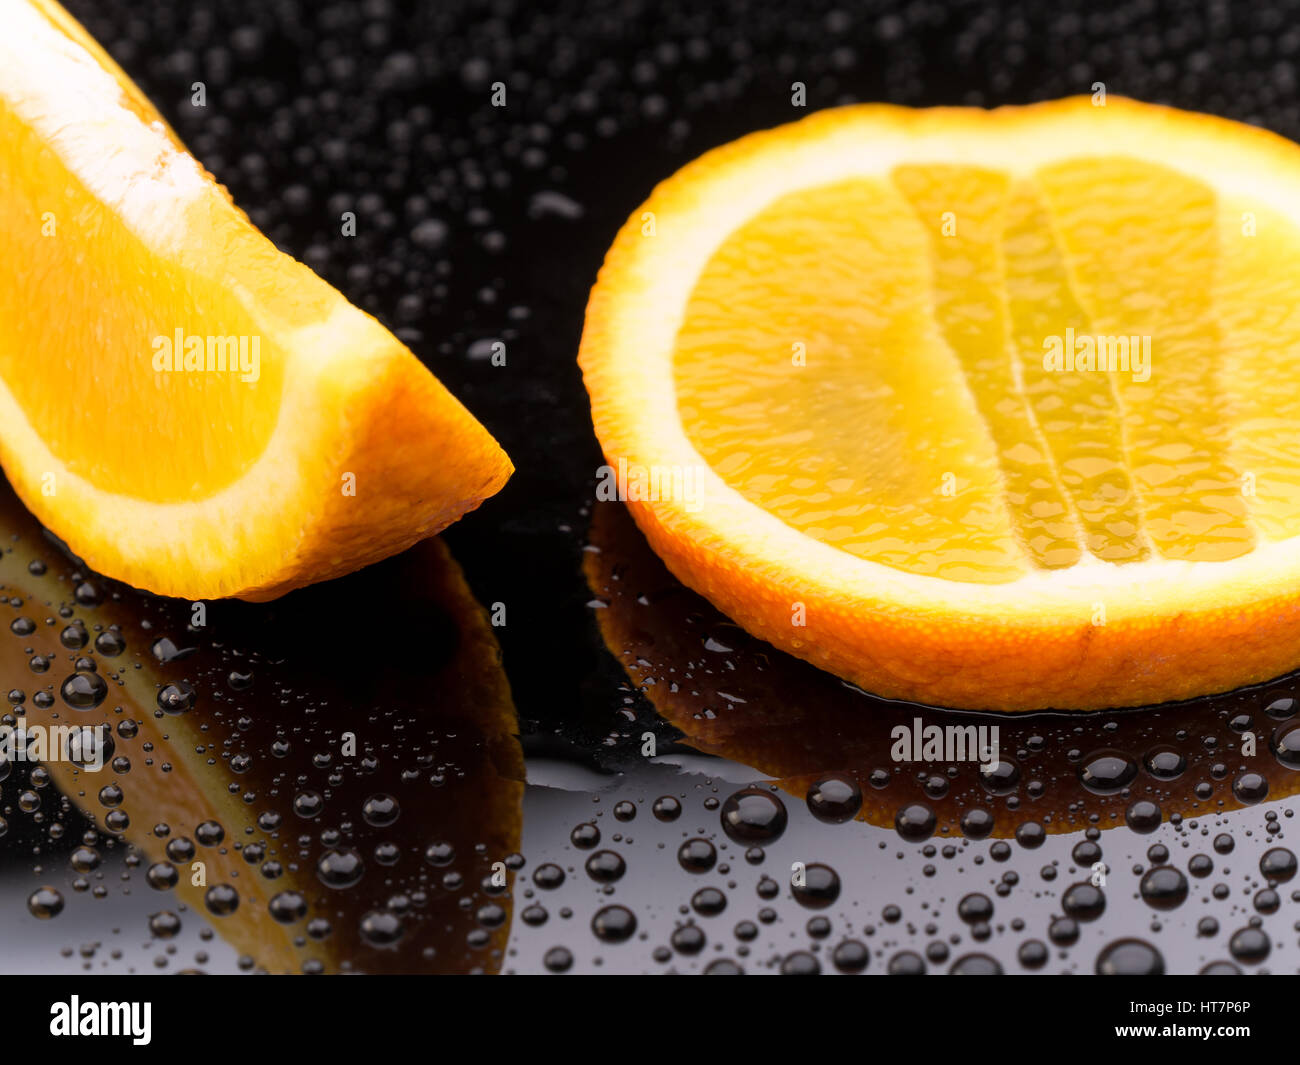 Healthy orange fruit pieces on a black reflective surface with water droplets Stock Photo